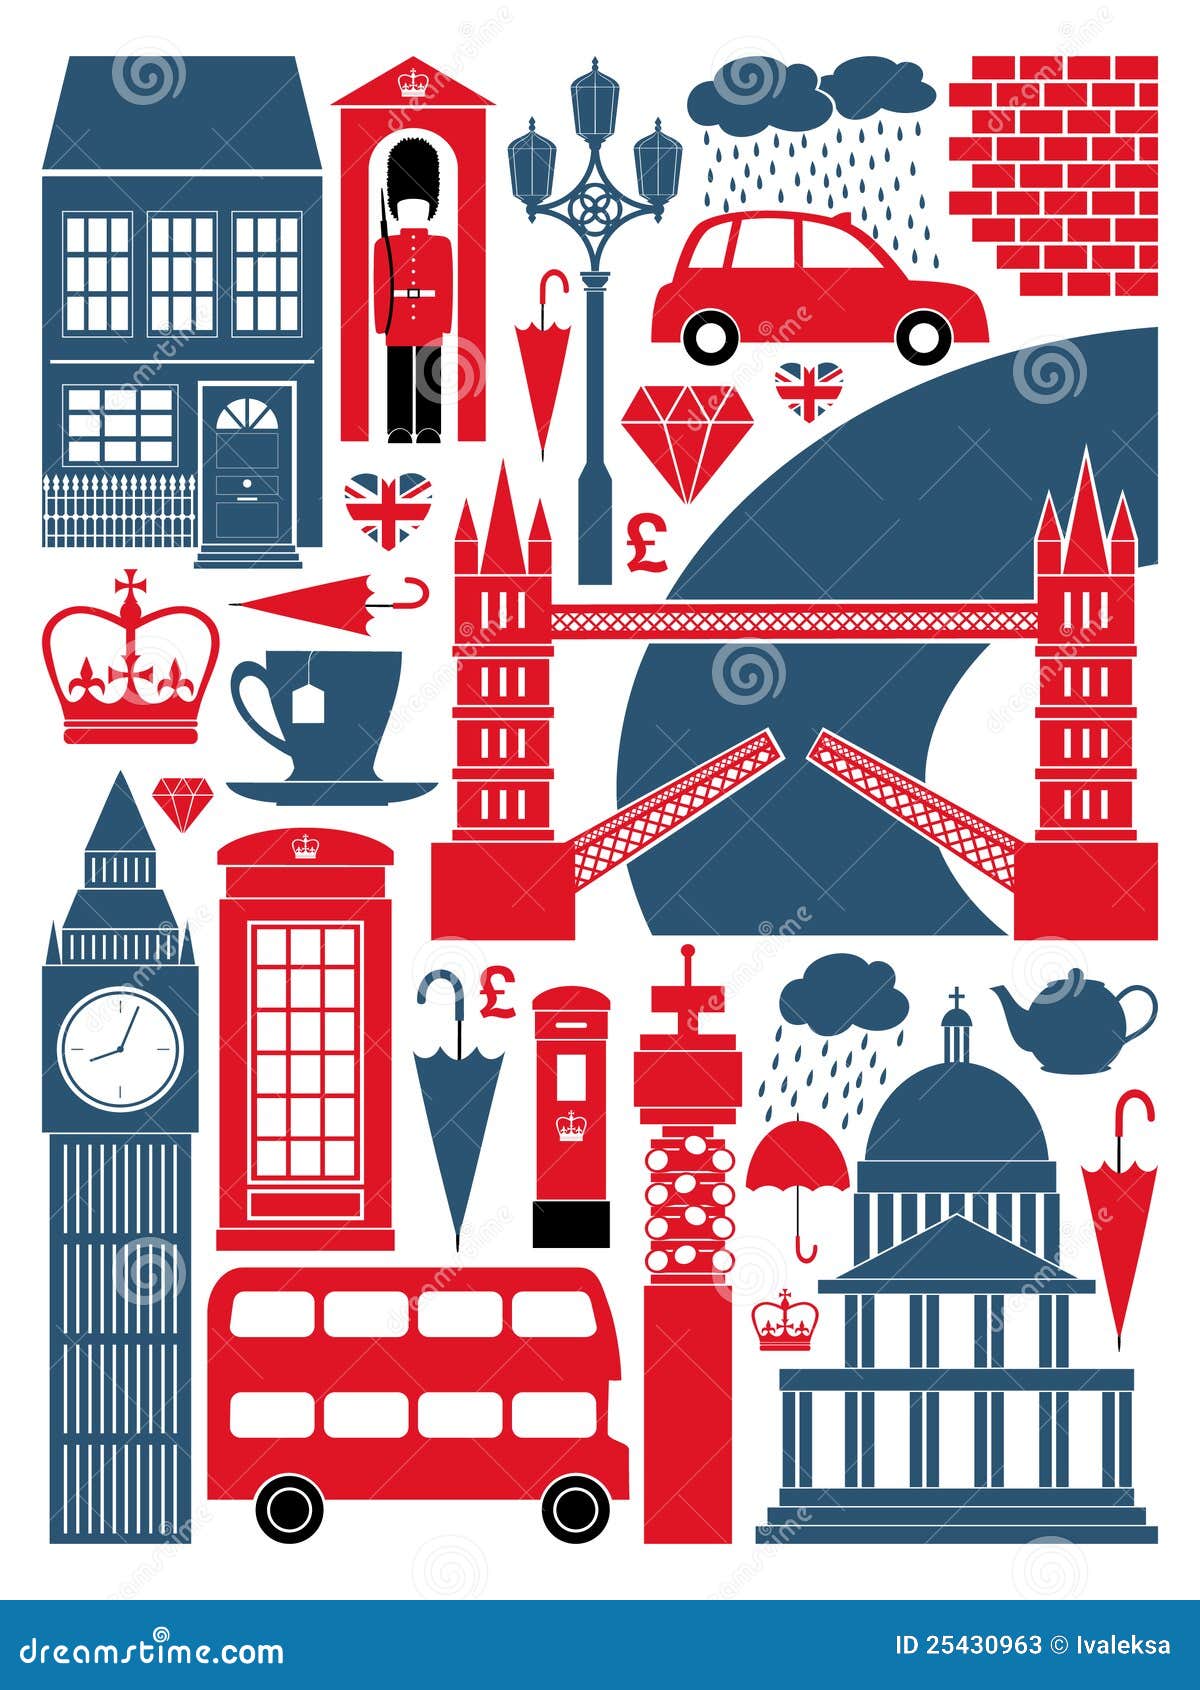 london clipart free download - photo #24